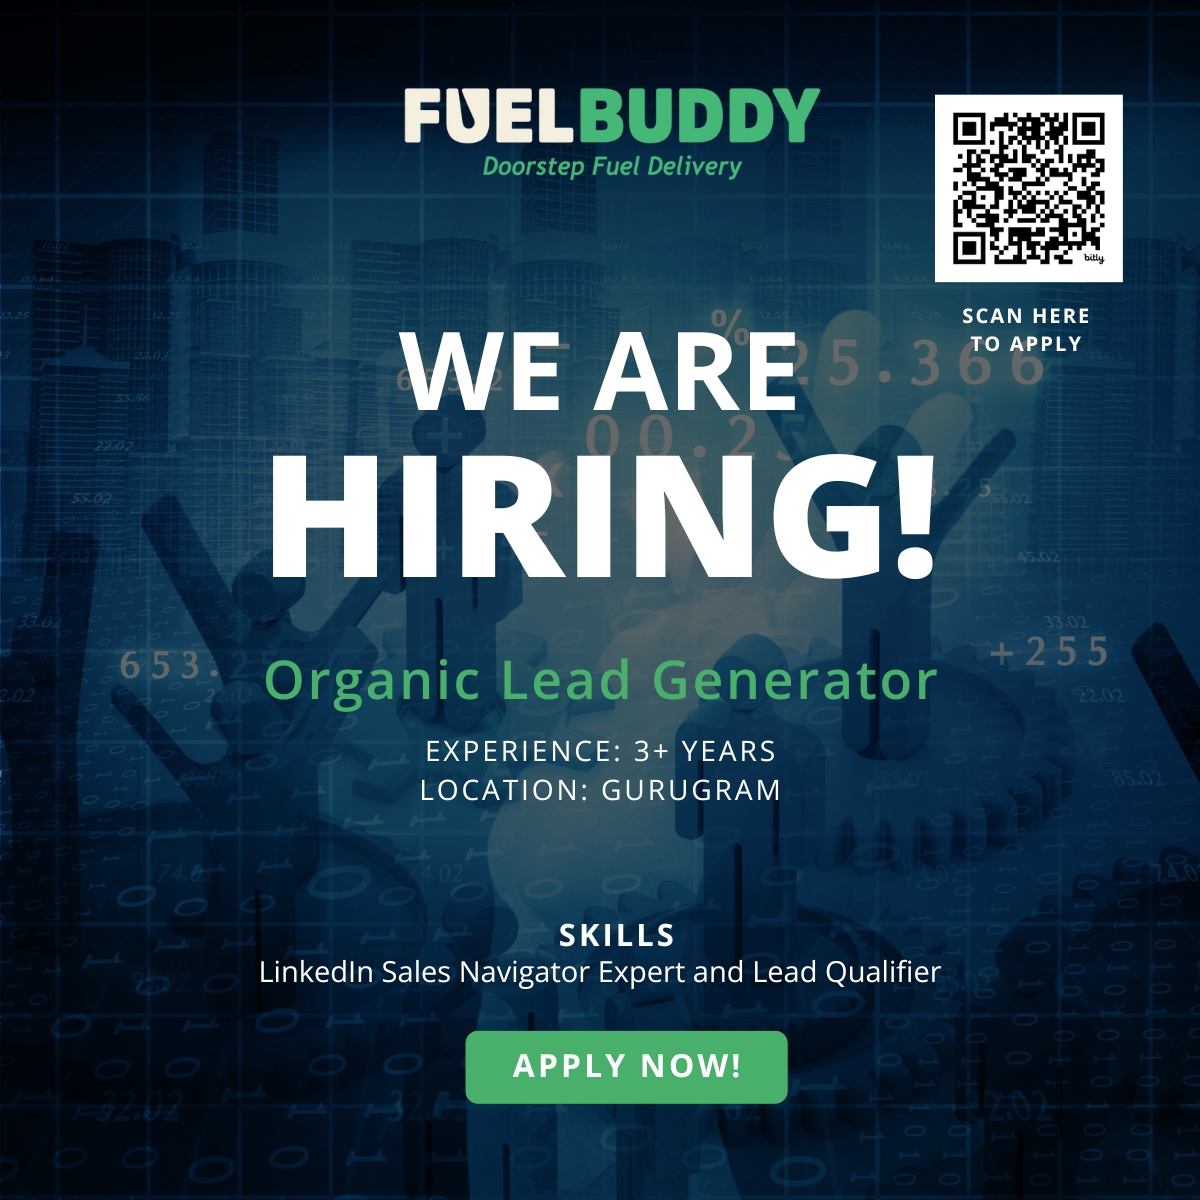 FuelBuddy is Hiring for Business Development team in Gurugram! We're looking for a LinkedIn Sales Navigator expert and lead qualifier to join the team.

Apply now: forms.gle/Uzzg87EFwLqPBn…

#BDhiring #GurugramJobs #Hiring #JoinTheTeam #fuelbuddy #Linkedinmarketing